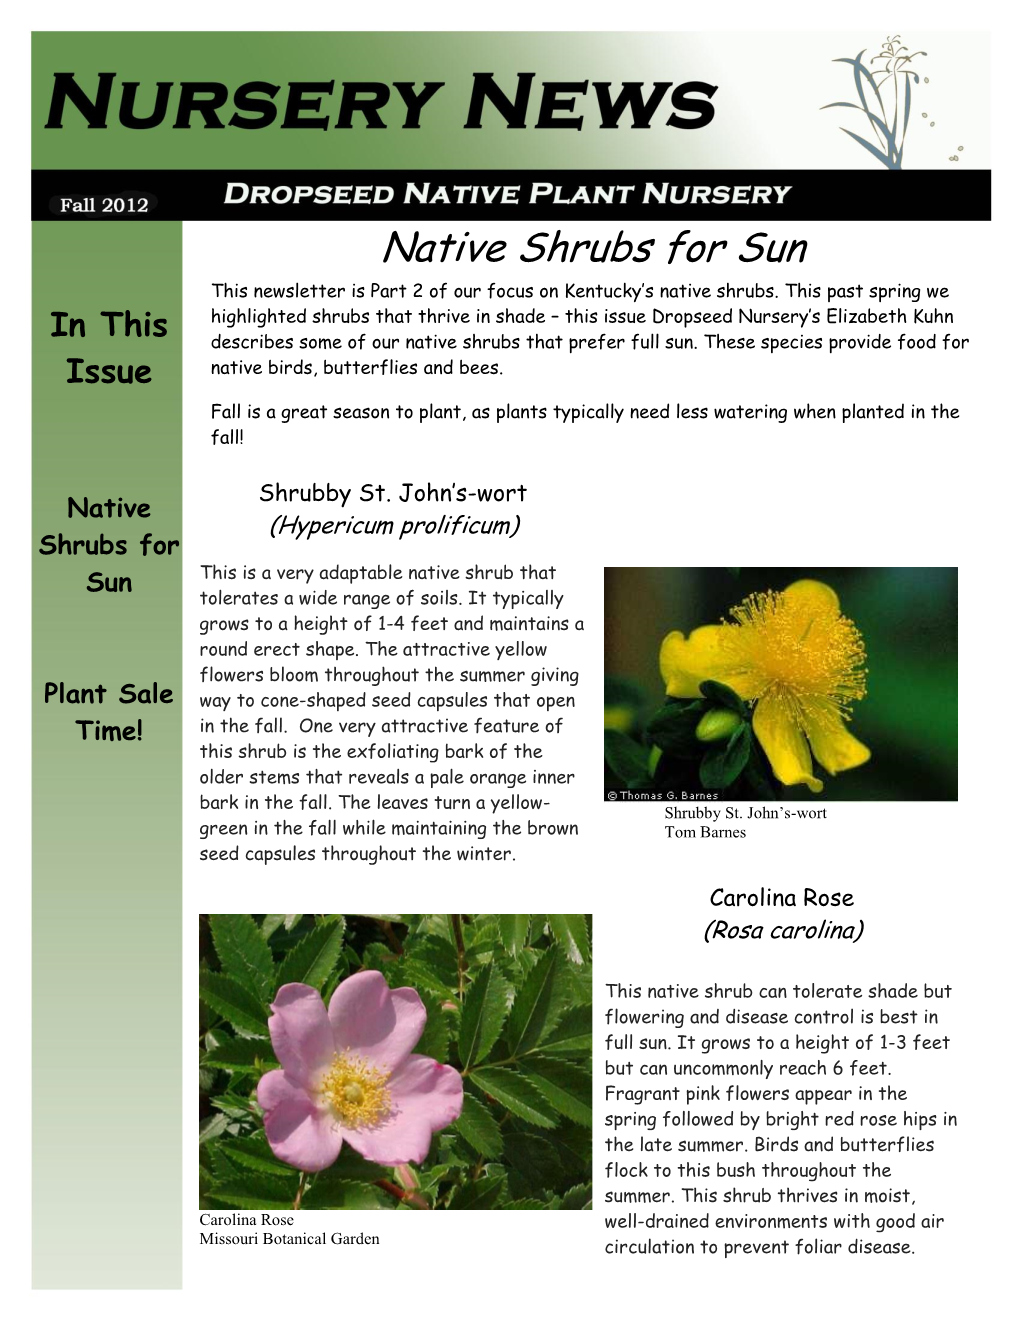 Native Shrubs for Sun This Newsletter Is Part 2 of Our Focus on Kentucky’S Native Shrubs